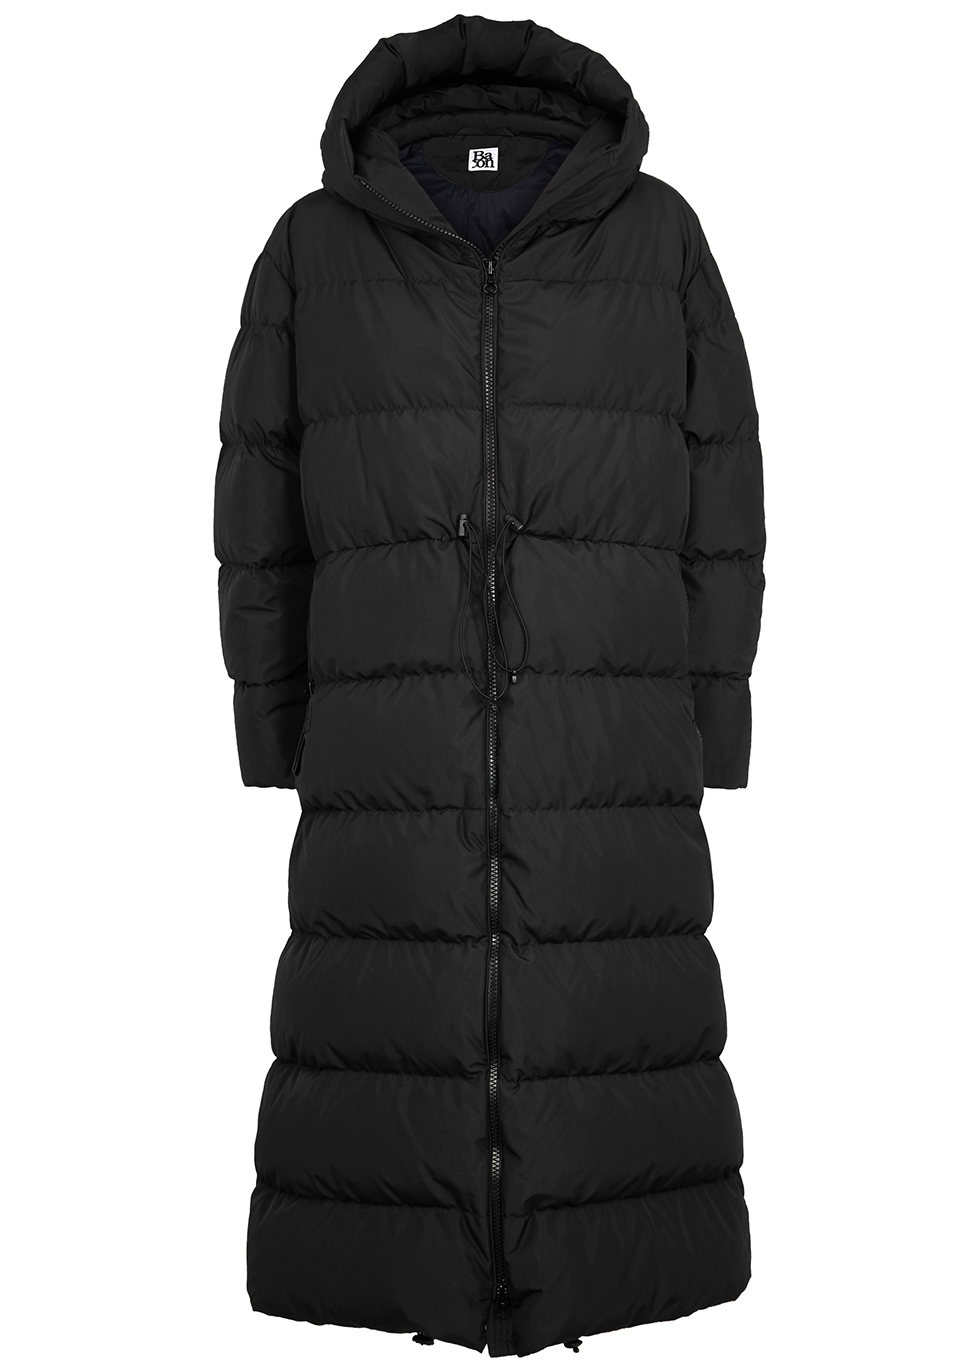 Big Cloud black quilted shell coat